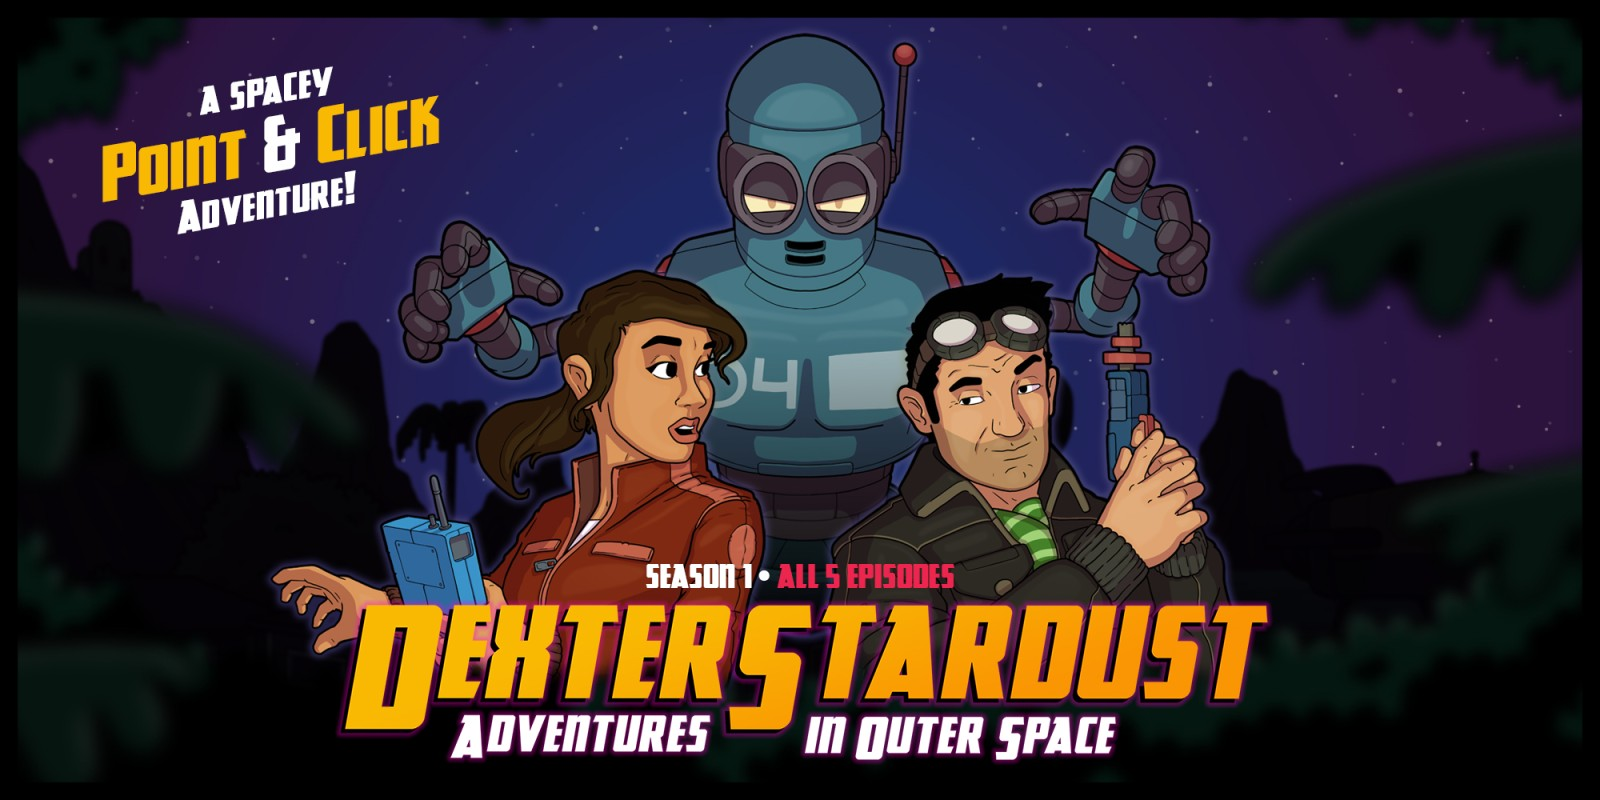 Play Dexter Stardust Adventures In Outer Space for Free